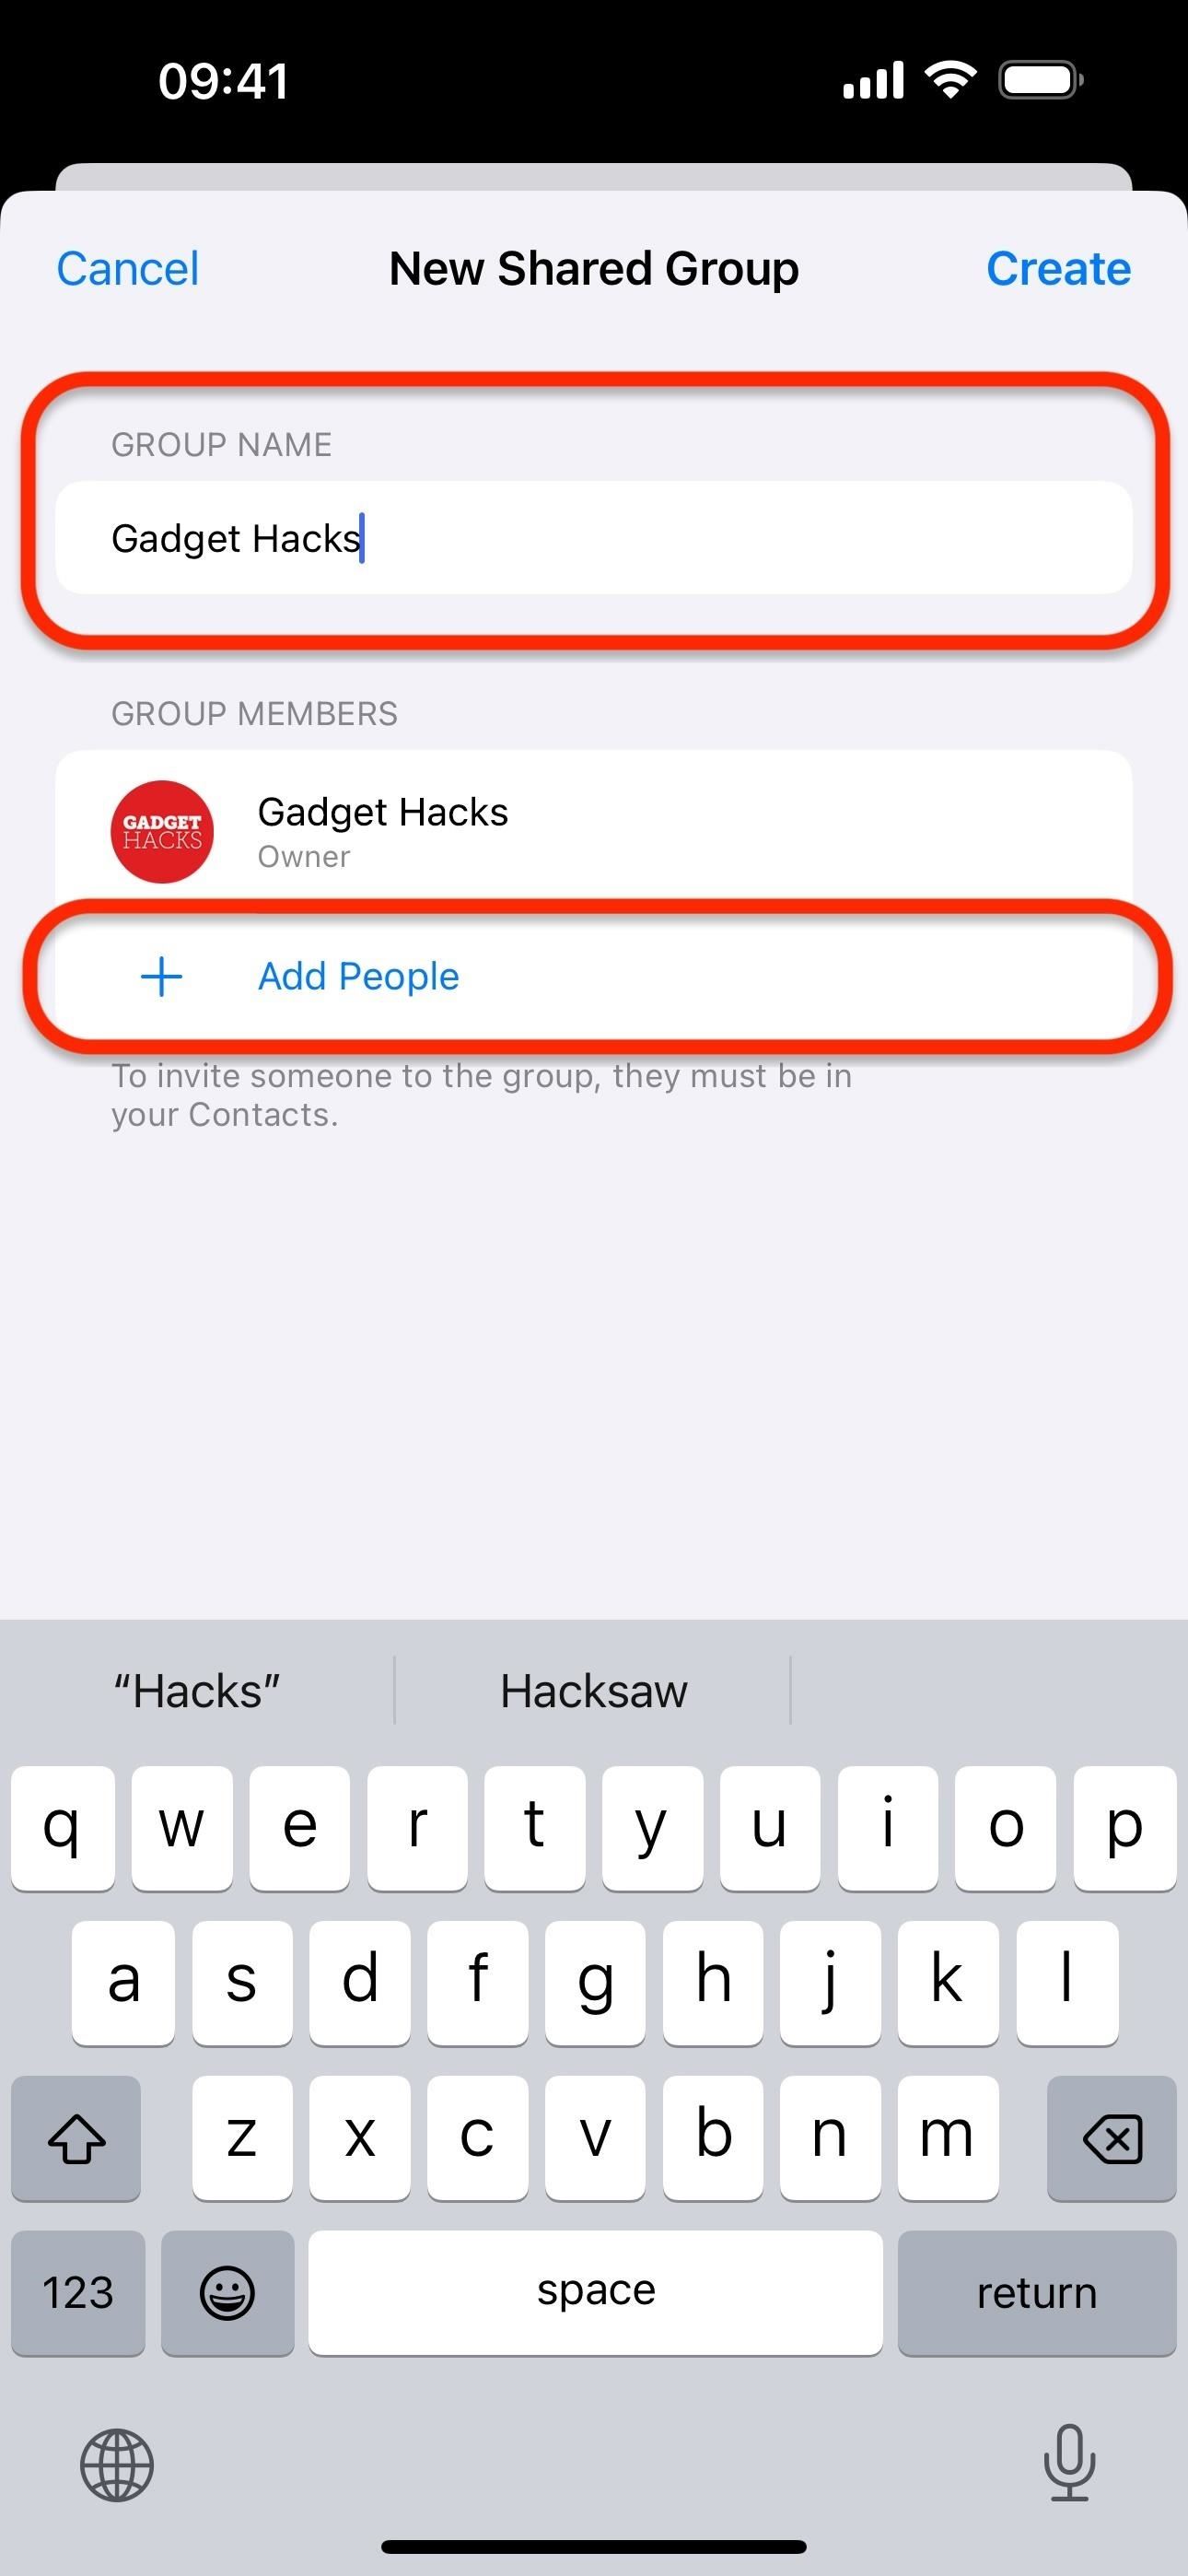 How to Share Account Passwords or Passkeys with People You Trust Easily from Your iPhone, iPad, or Mac